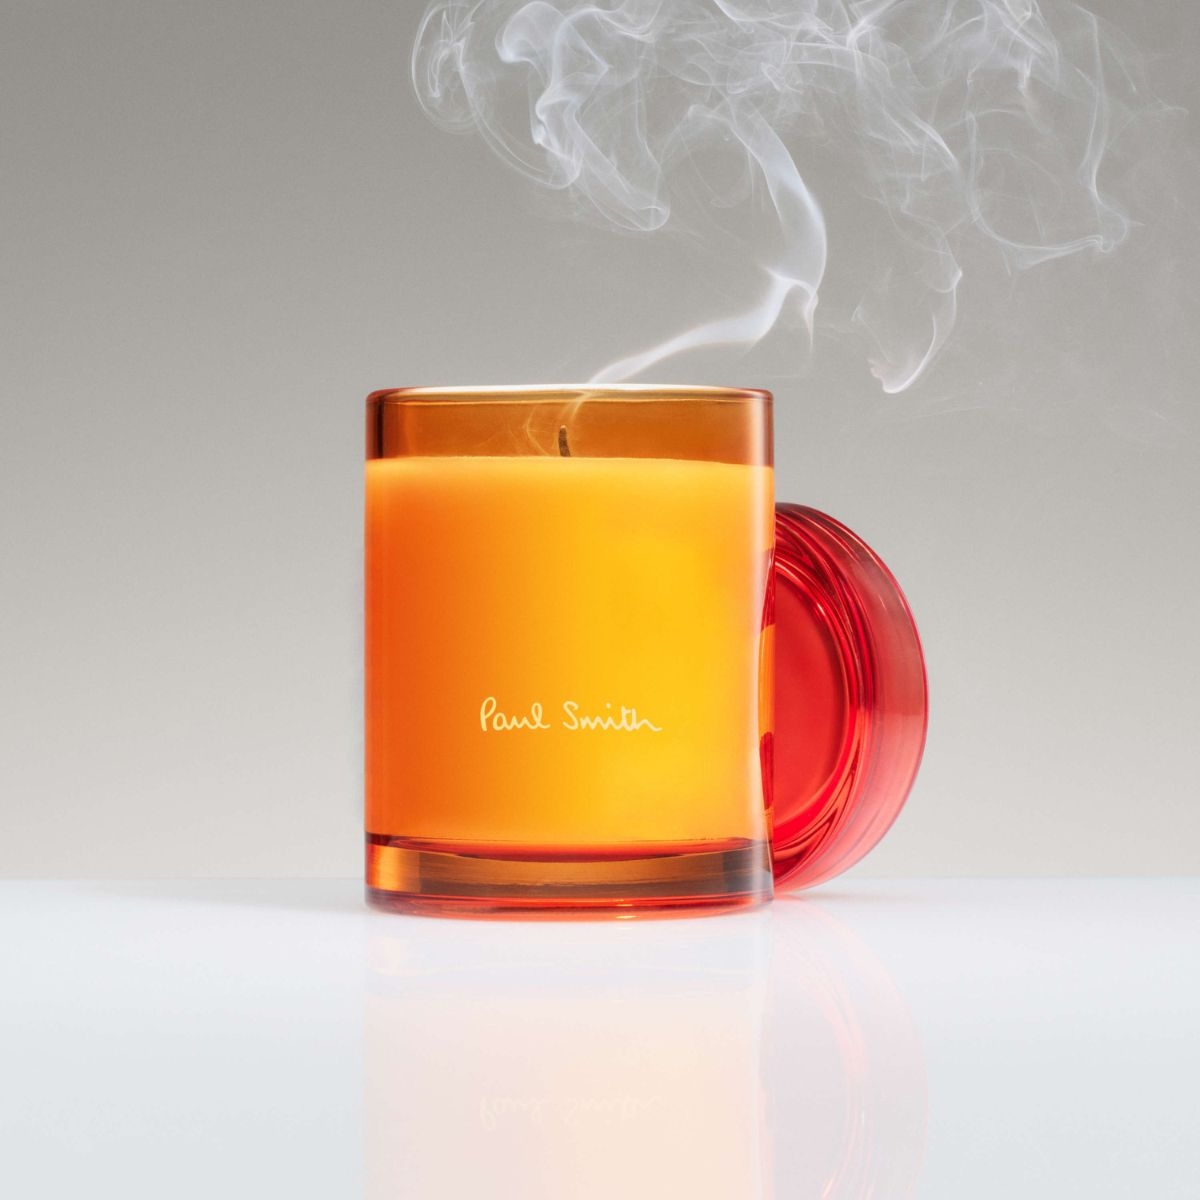 Image of Bookworm 240g scented candle by the brand Paul Smith